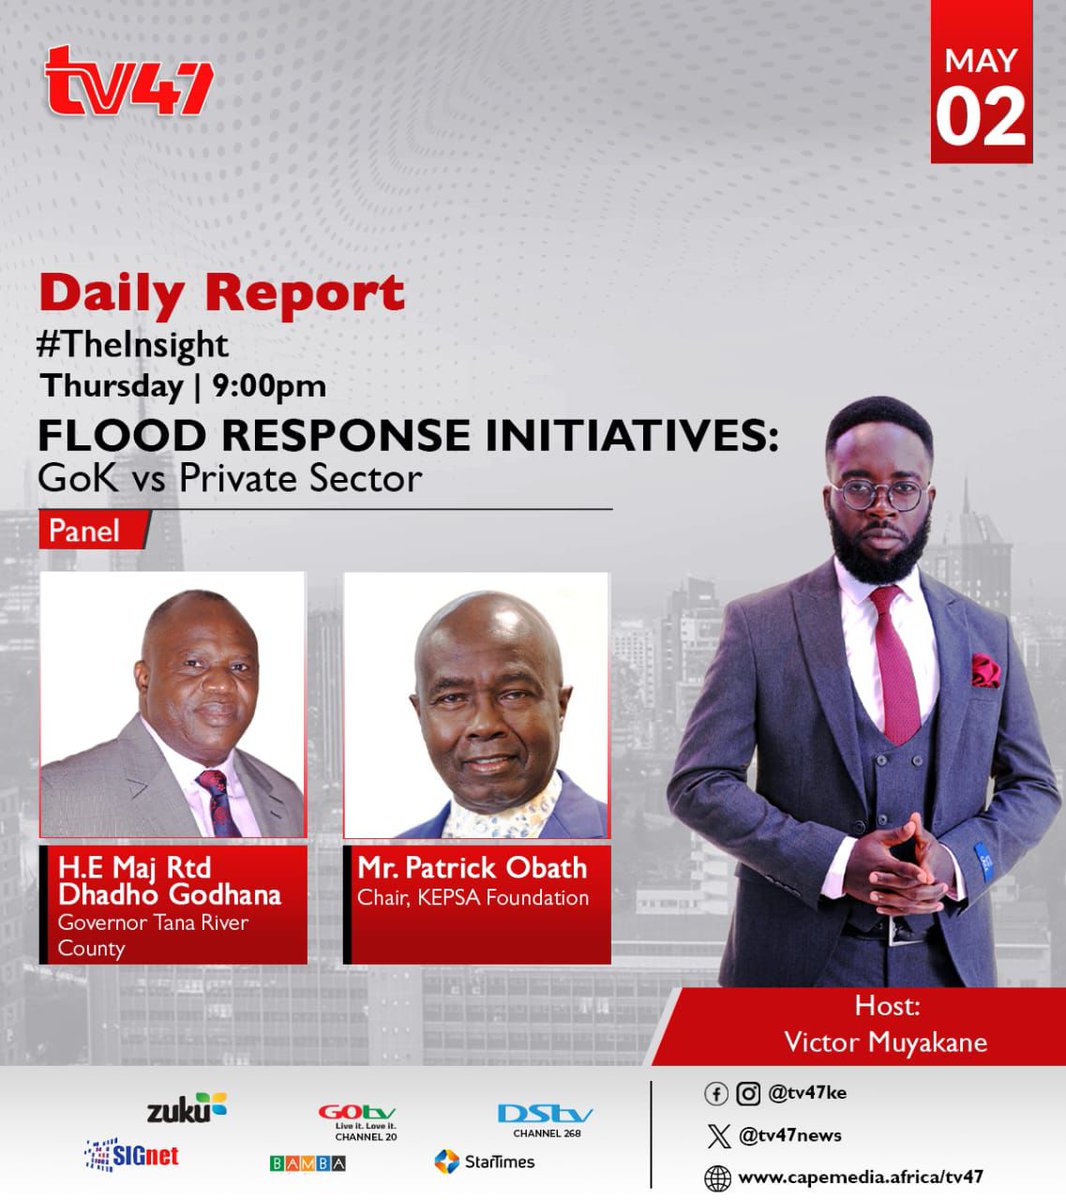 Tonight on TV47, catch #KEPSA Foundation Chair, Mr Patrick Obath, during a live interview, as he discusses the Private Sector Flood Response Initiative. He’ll be joined by H.E. Maj. Rtd. Dhadho Godhana, the Tana River County Governor. Link: youtube.com/@TV47Kenya?si=…